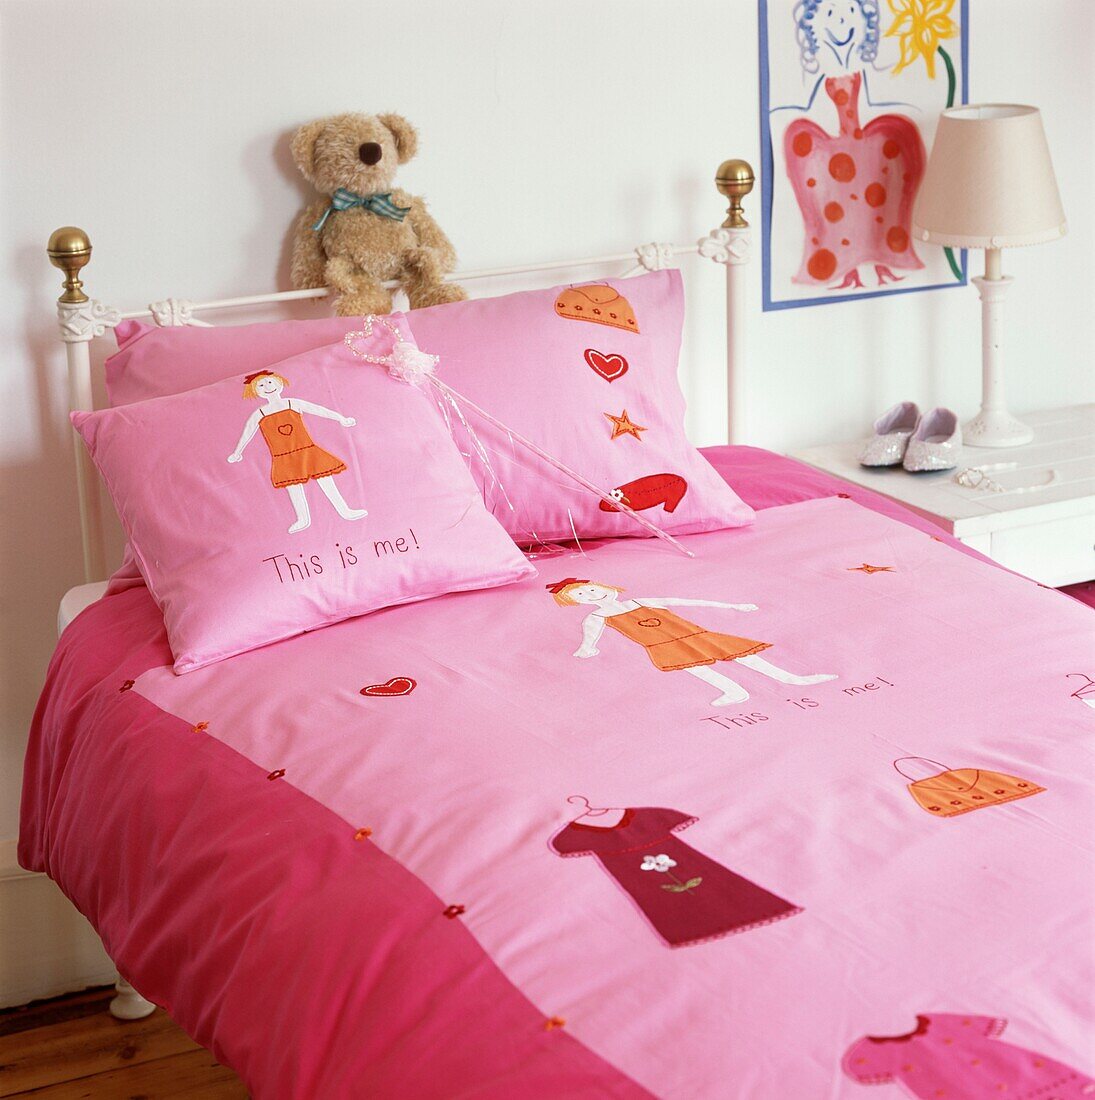 Pink duvet on single bed with soft toy